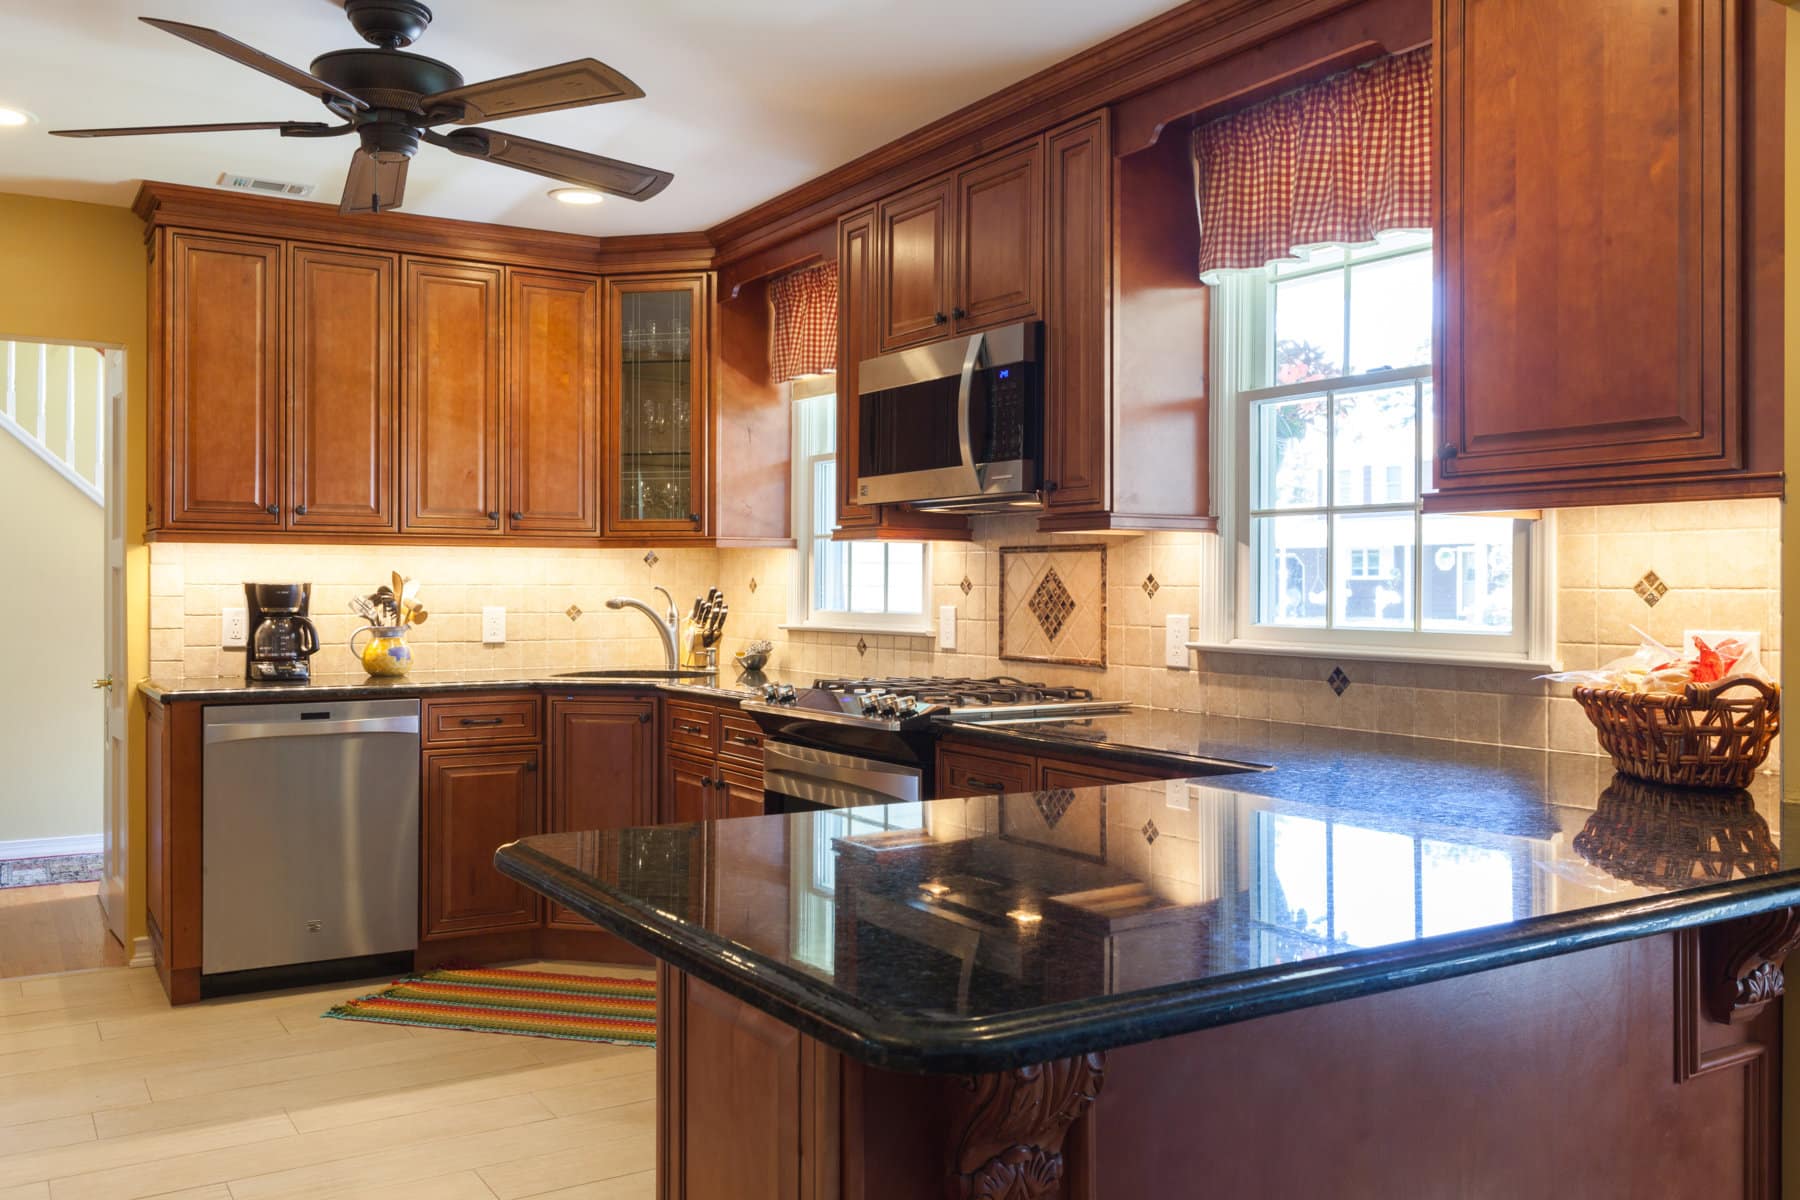 J&K brown kitchen cabinets with black countertops